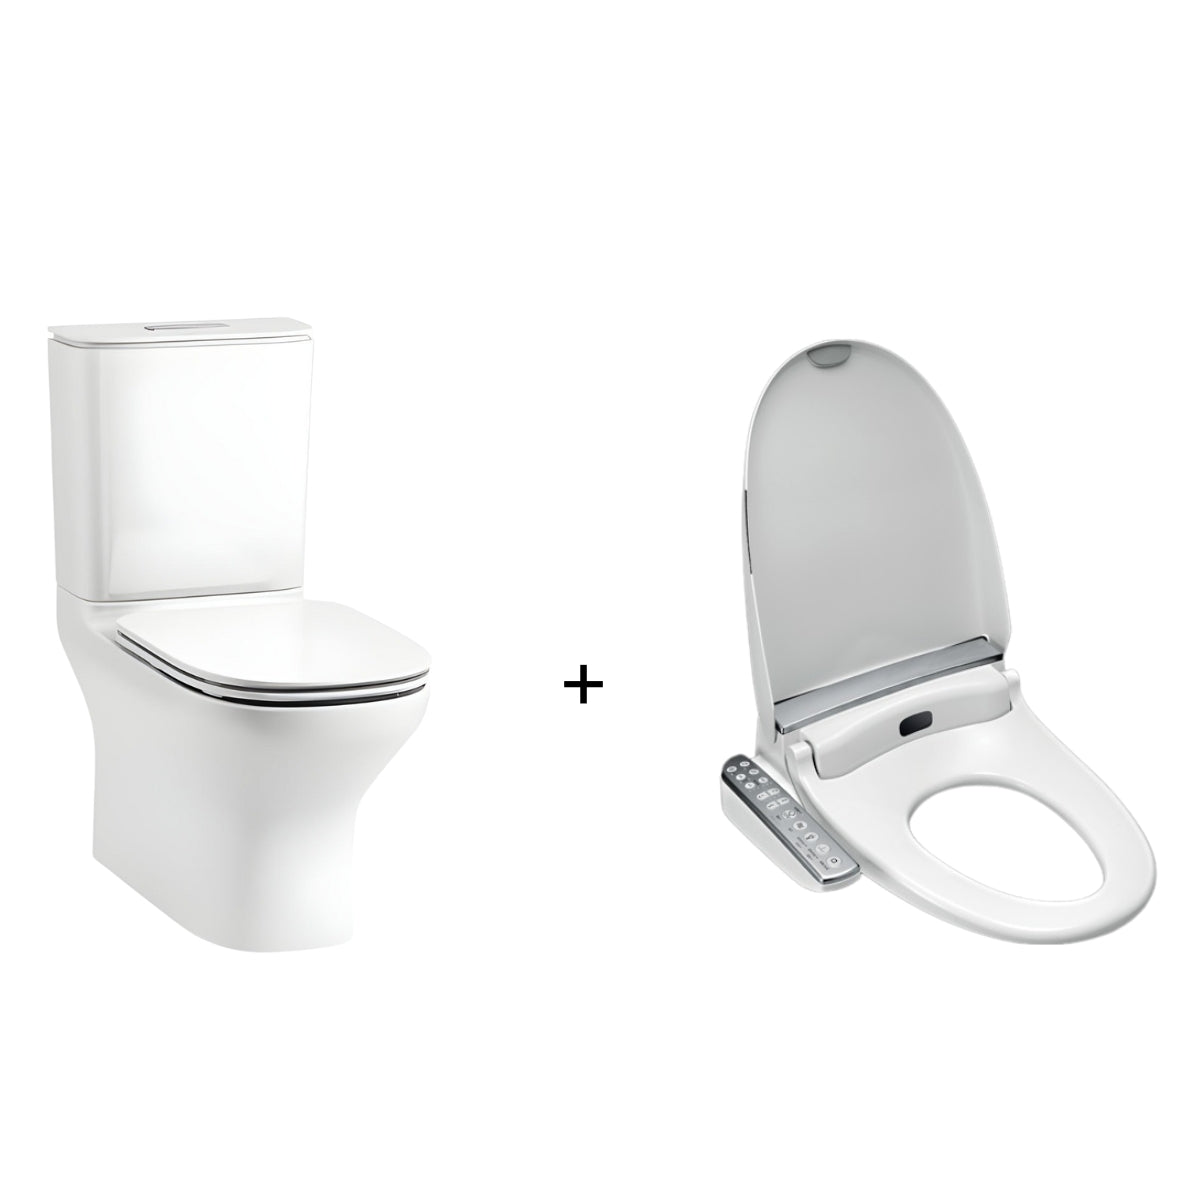 KOHLER ELECTRONIC BIDET SEAT W/ SIDE CONTROL AND MODERNLIFE BACK TO WALL TOILET PACKAGE ELONGATED GLOSS WHITE